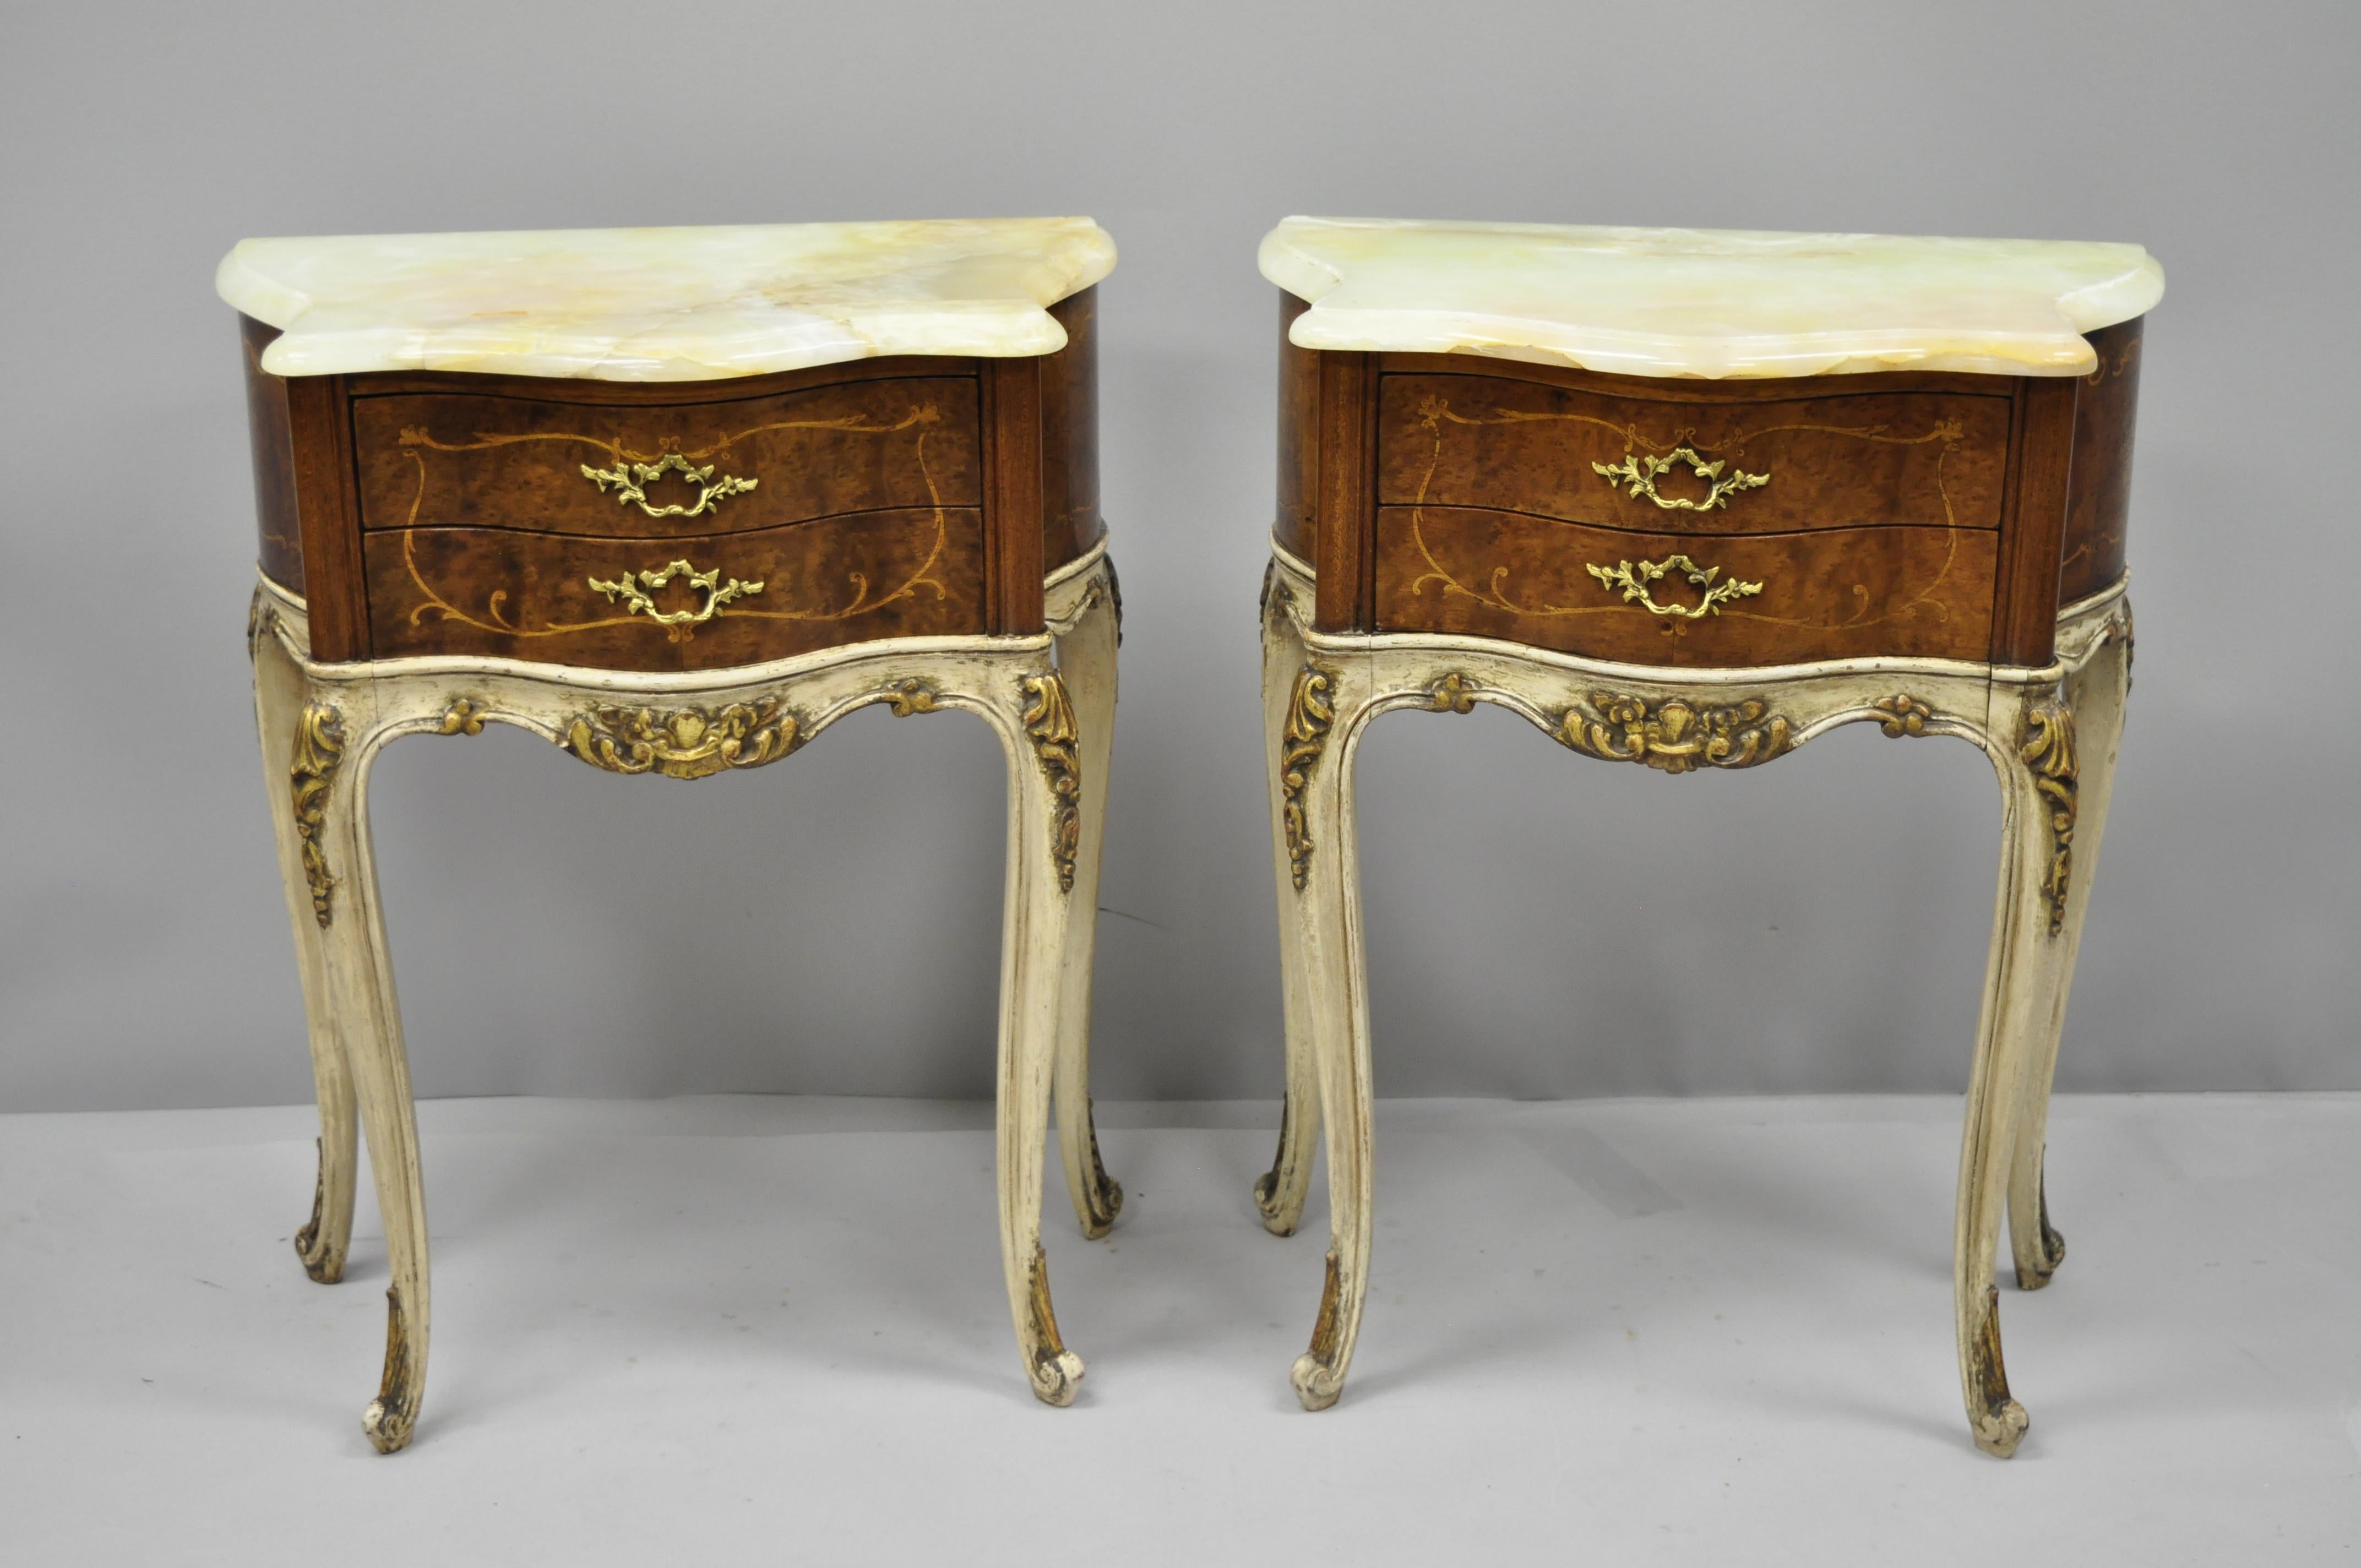 Pair of antique French Louis XV style small onyx top inlaid bombe nightstands. Item features shaped onyx stone tops, nice petite from, bombe shaped base, inlaid drawer fronts, and sides, cream and gold distressed painted, circa early 20th century.